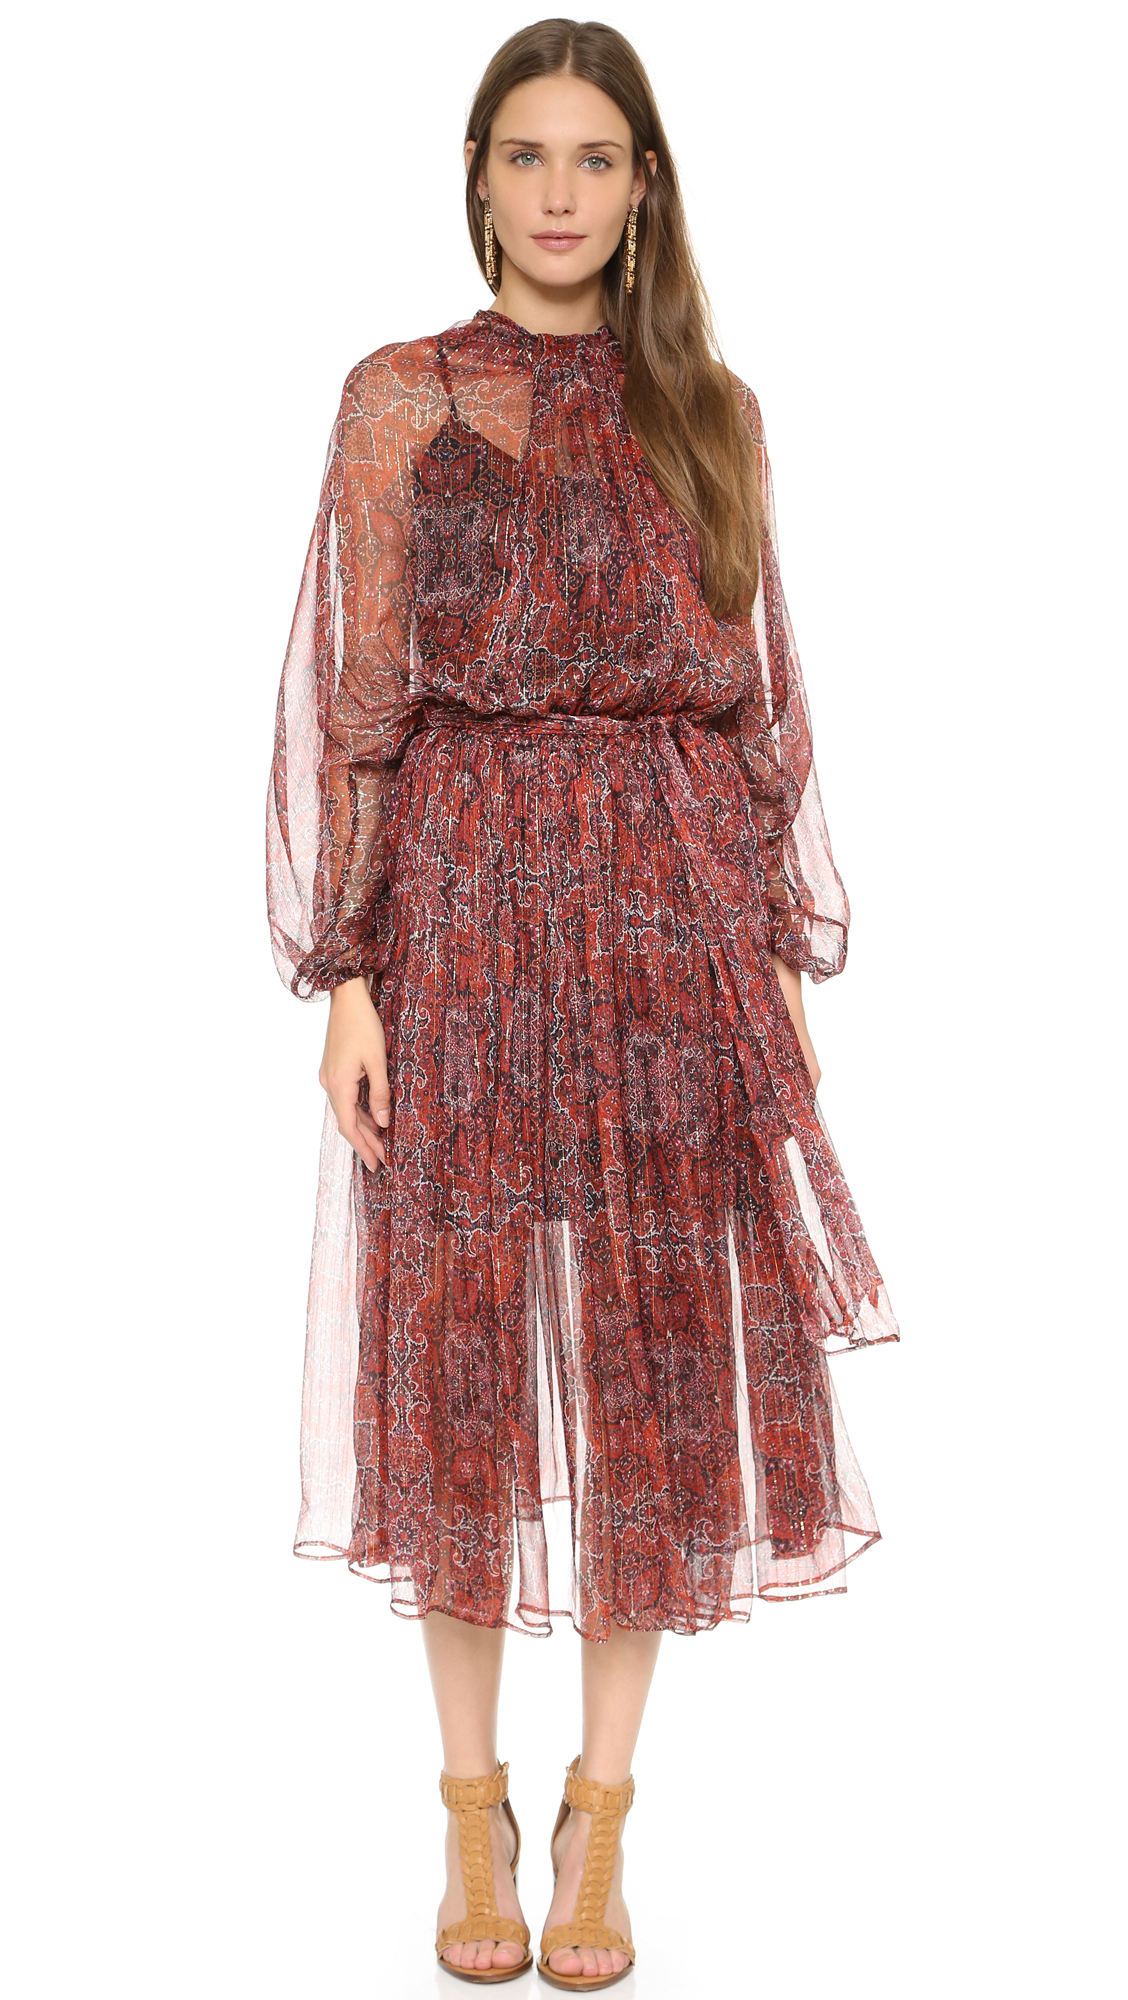 Lyst - Zimmermann Empire Laced Dress With Slip in Red